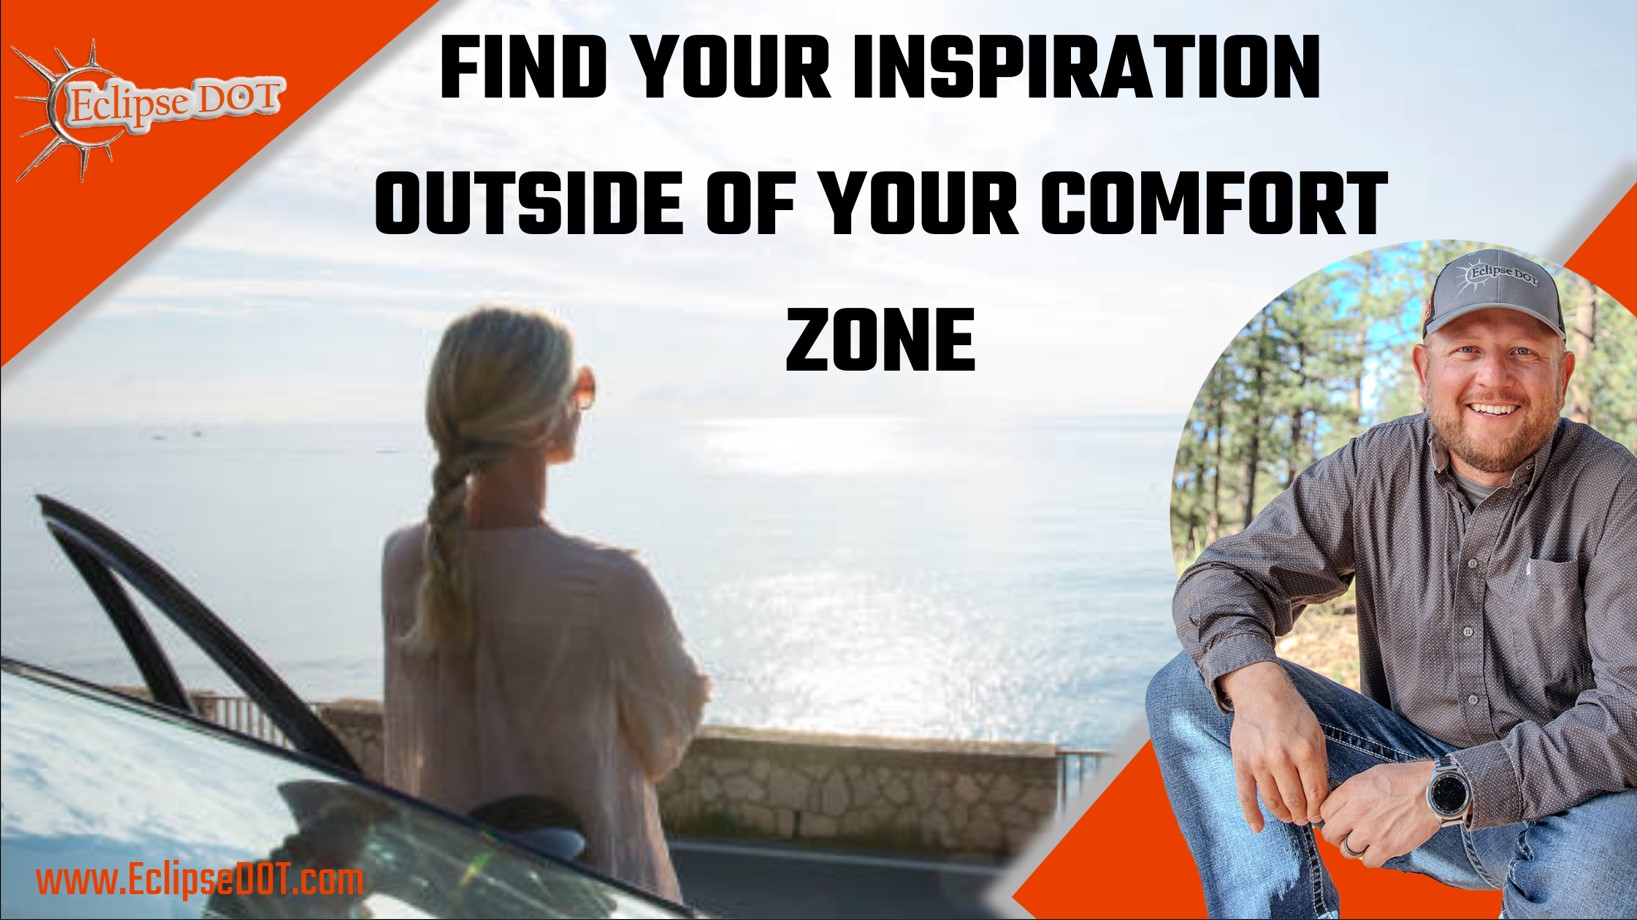 Discover inspiration beyond your comfort zone for a transformative experience.